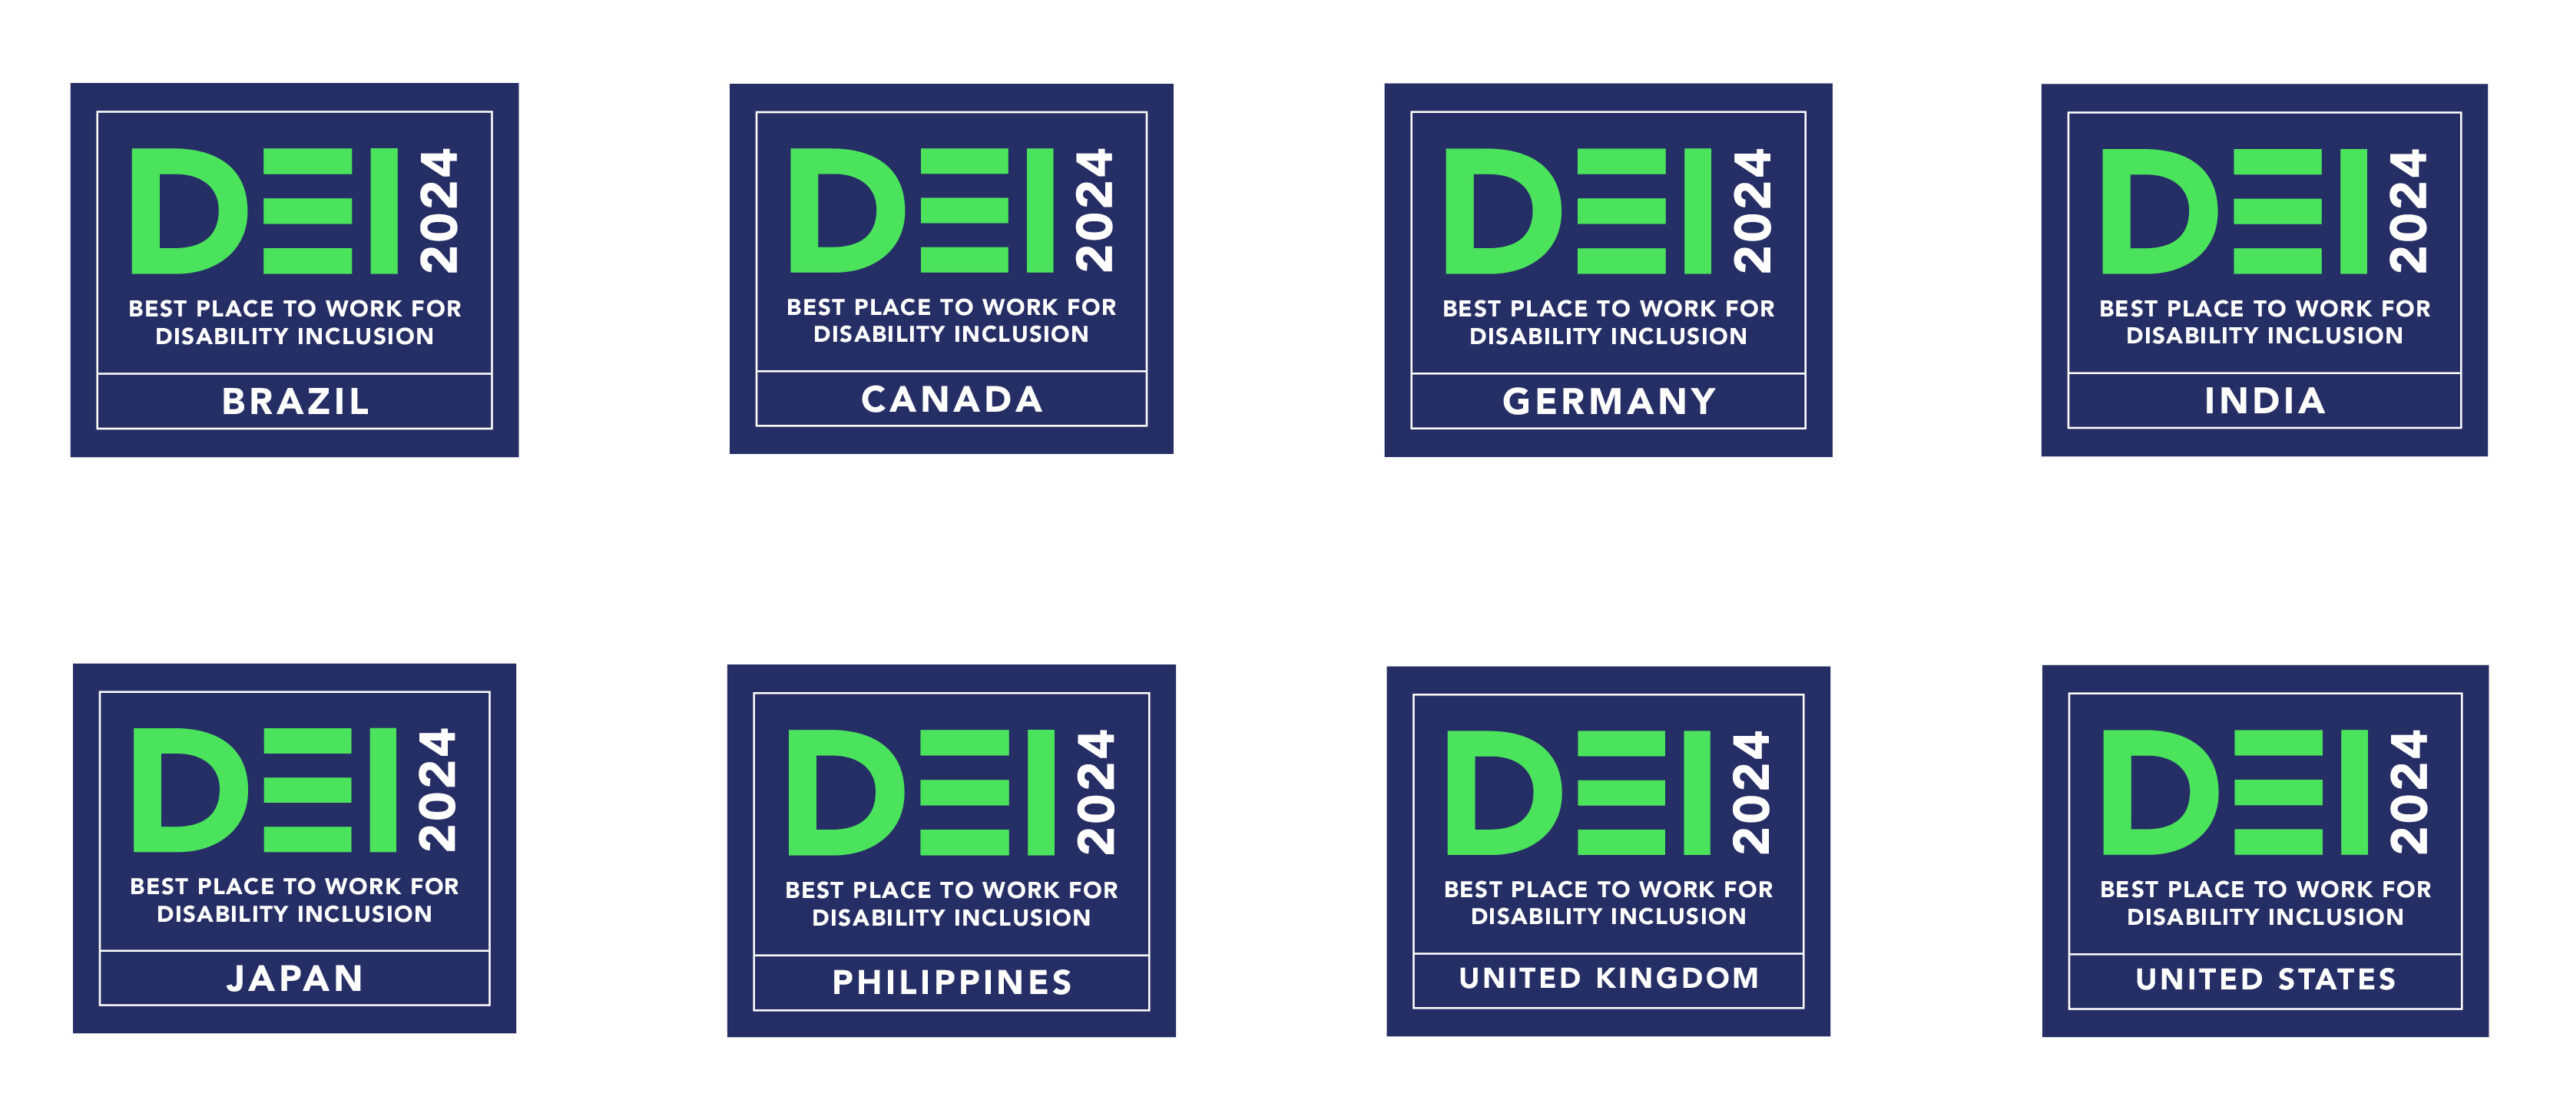 Disability Equality Index logos for Brazil, Canada, Germany, India, Japan, Philippines, United Kingdom, and the United States.